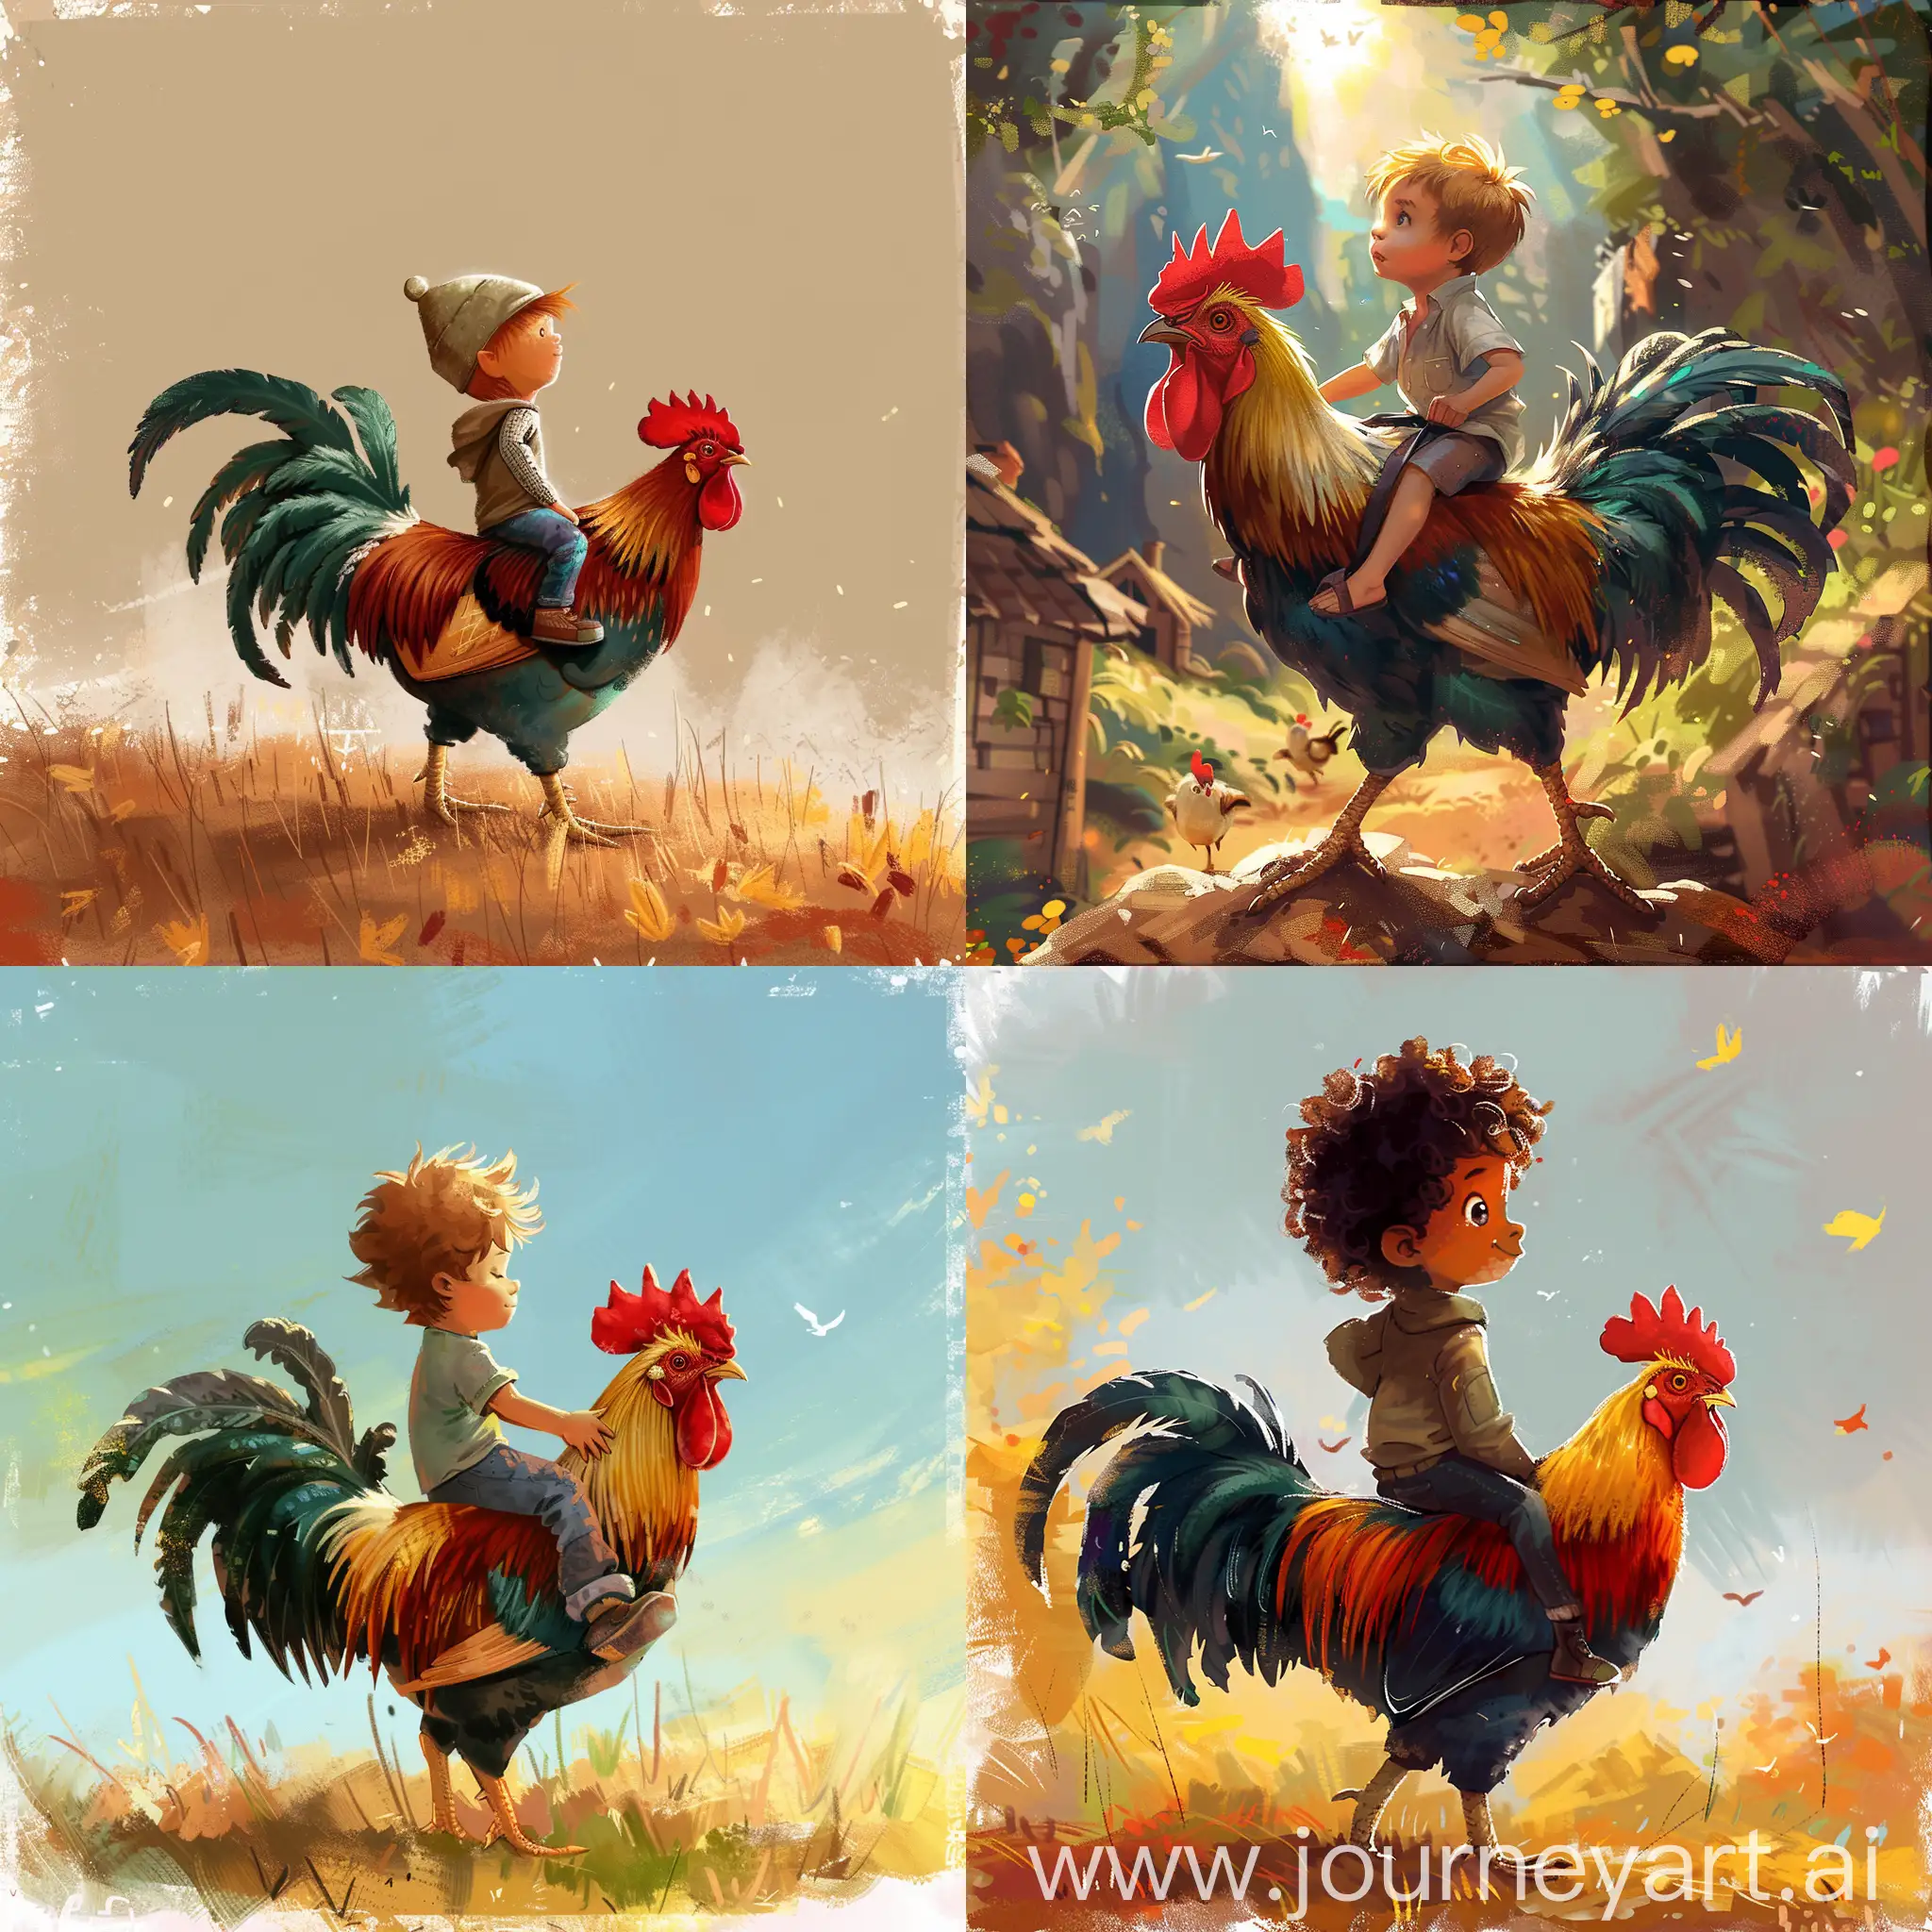 Playful-Child-Riding-a-Rooster-in-a-Vibrant-Setting